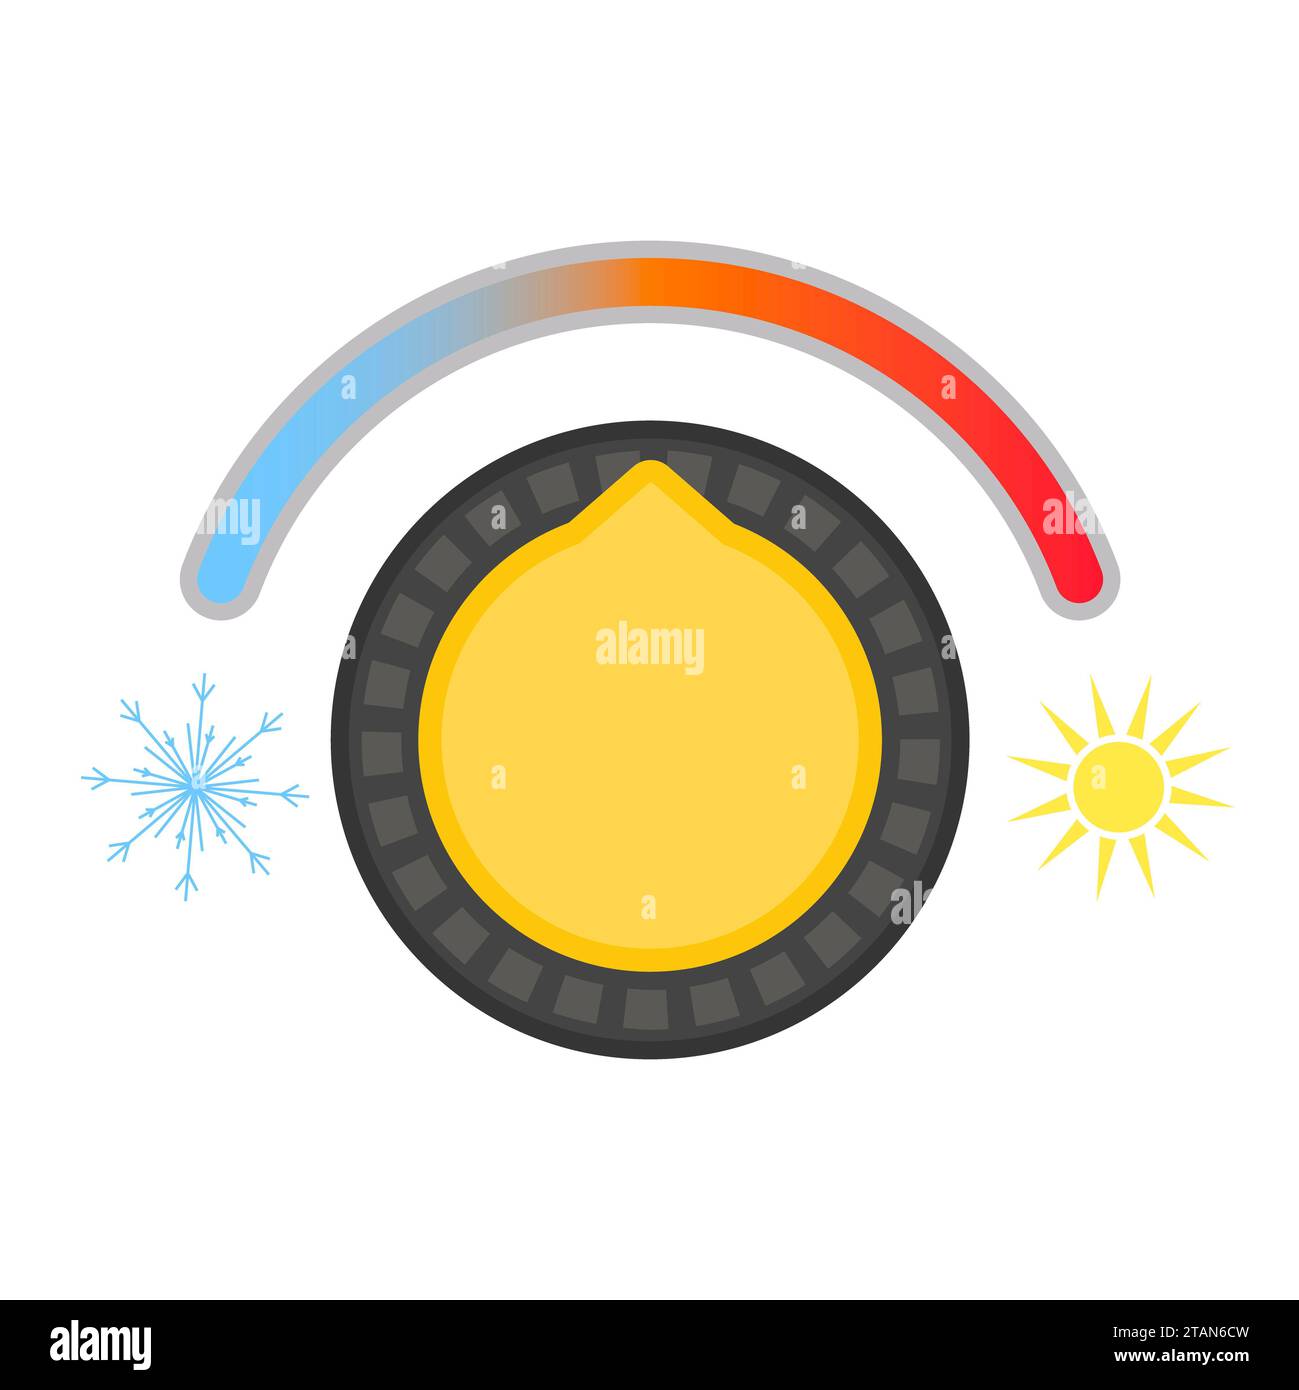 Heating costs, conceptual illustration Stock Photo